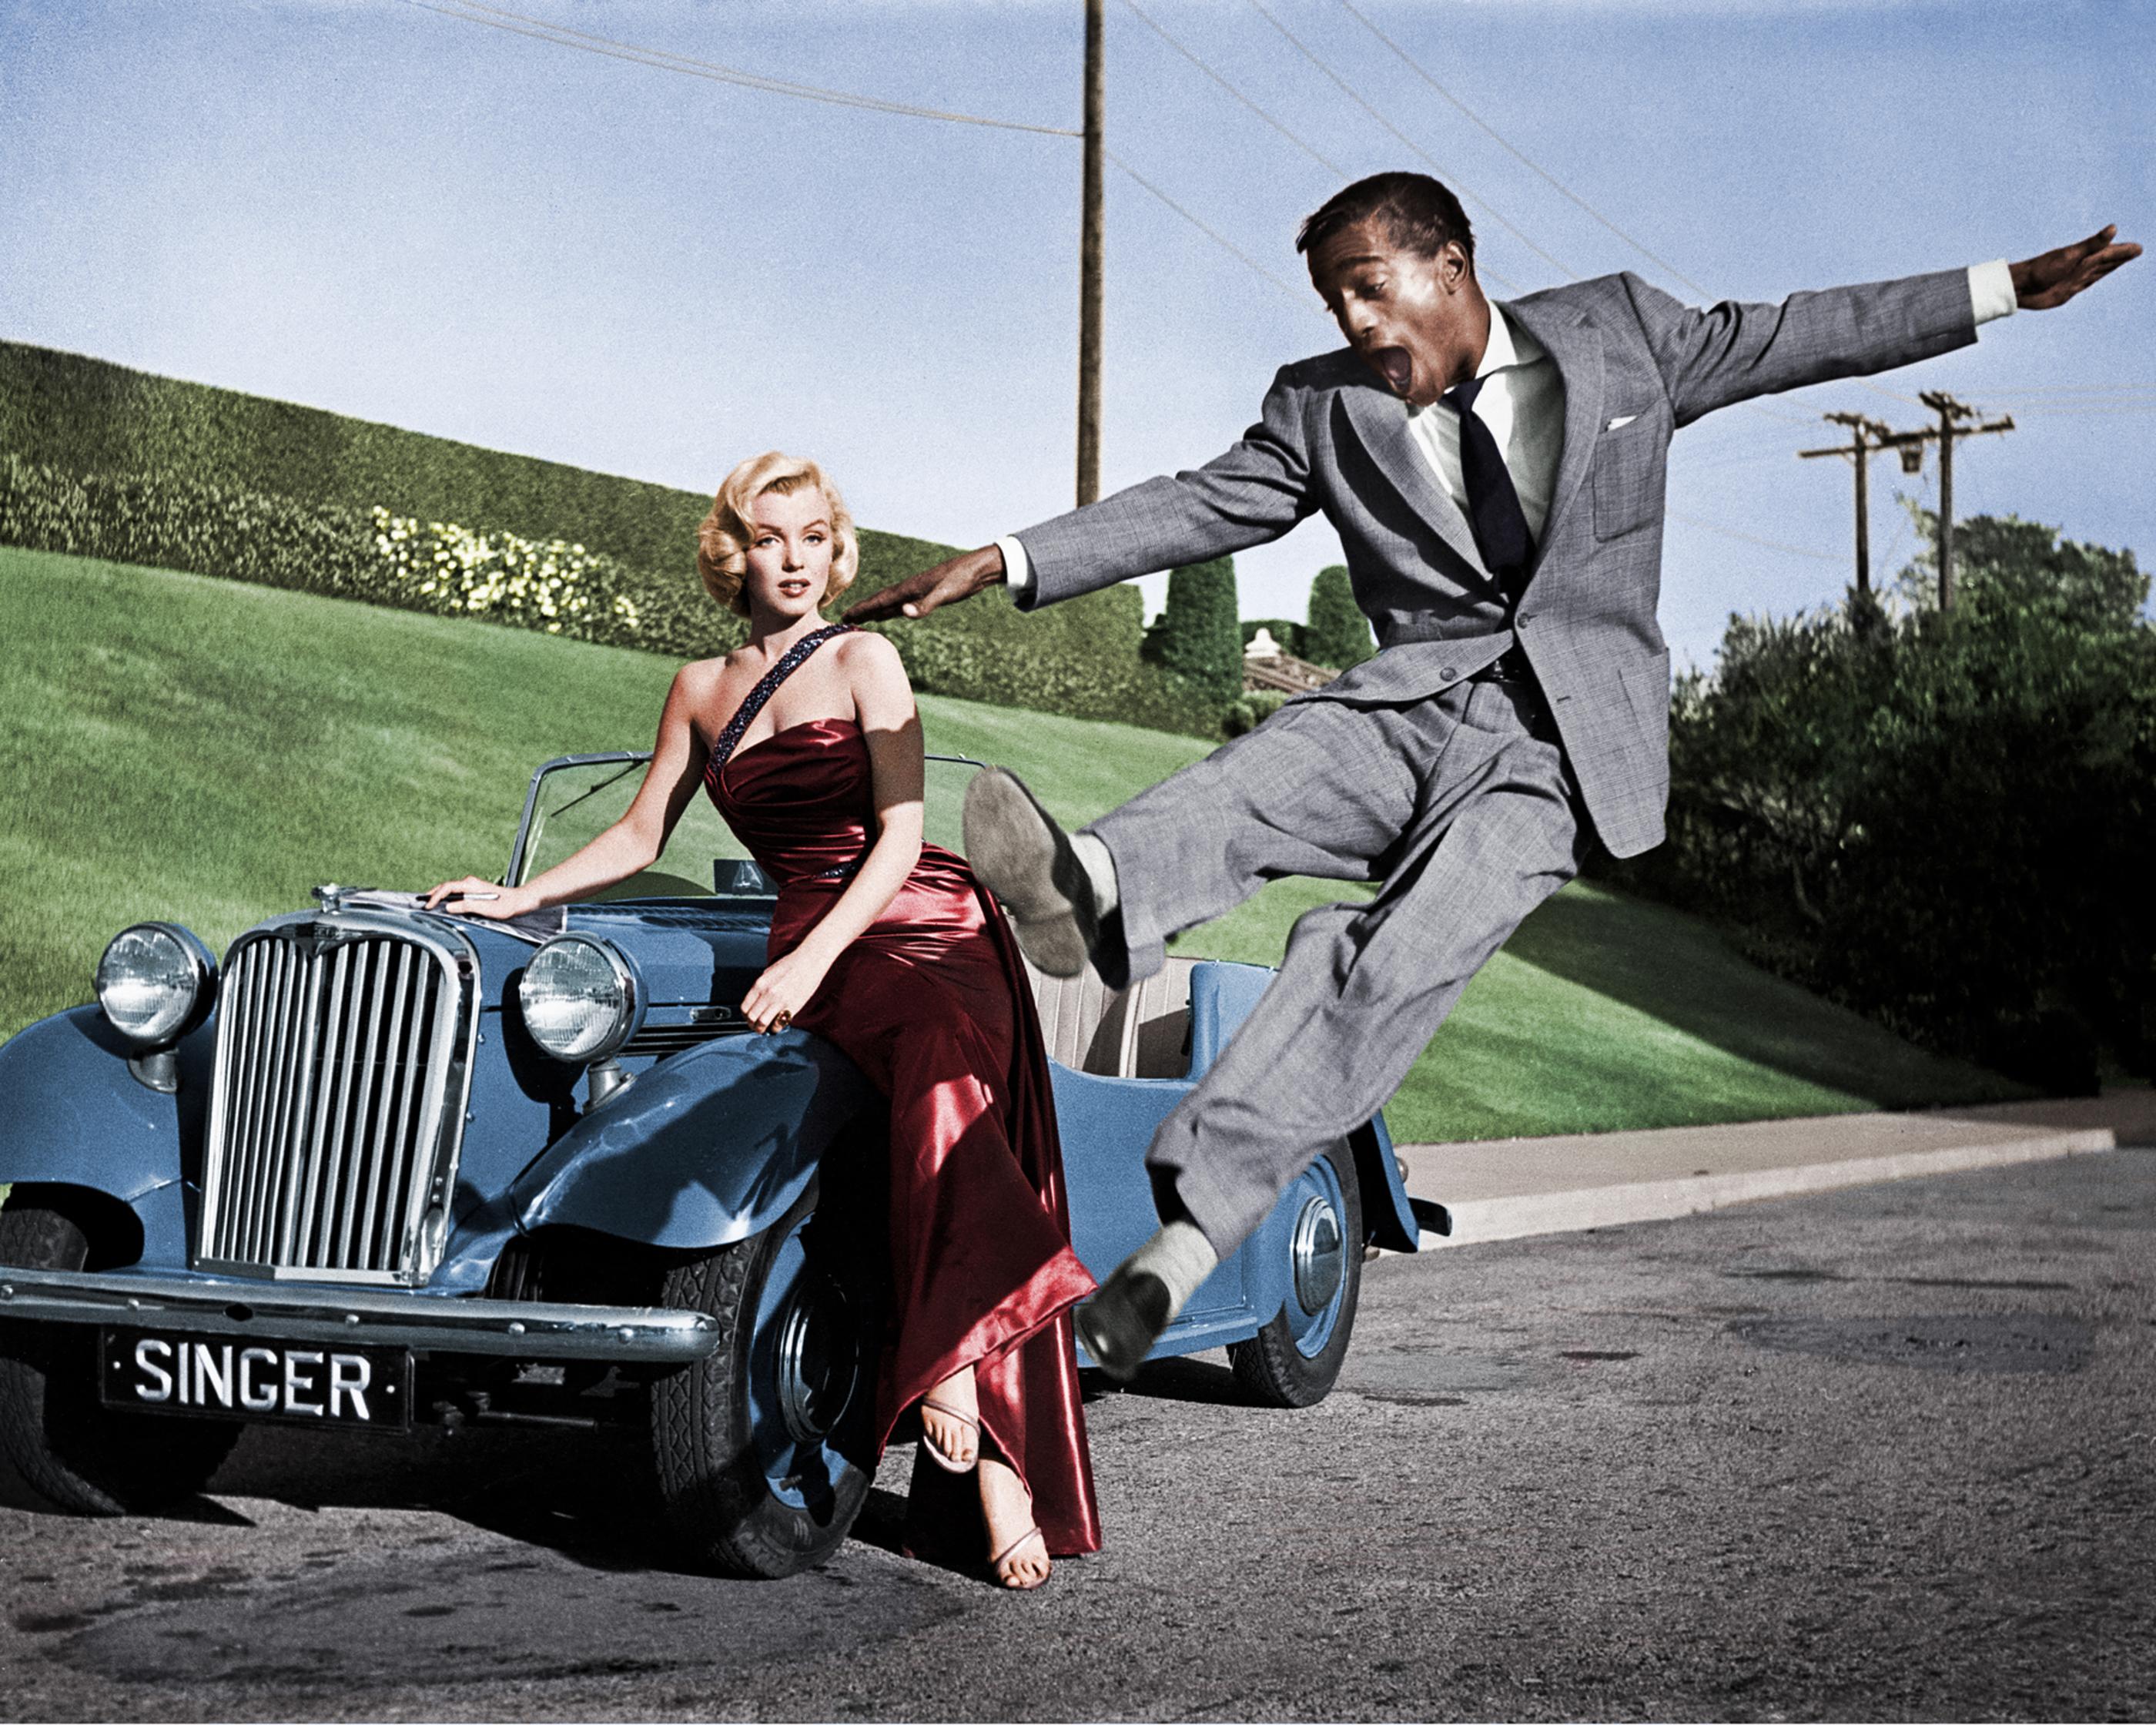 Marilyn Monroe and Sammy Davis Jr. in How to Marry a Millionaire 20" x 16"